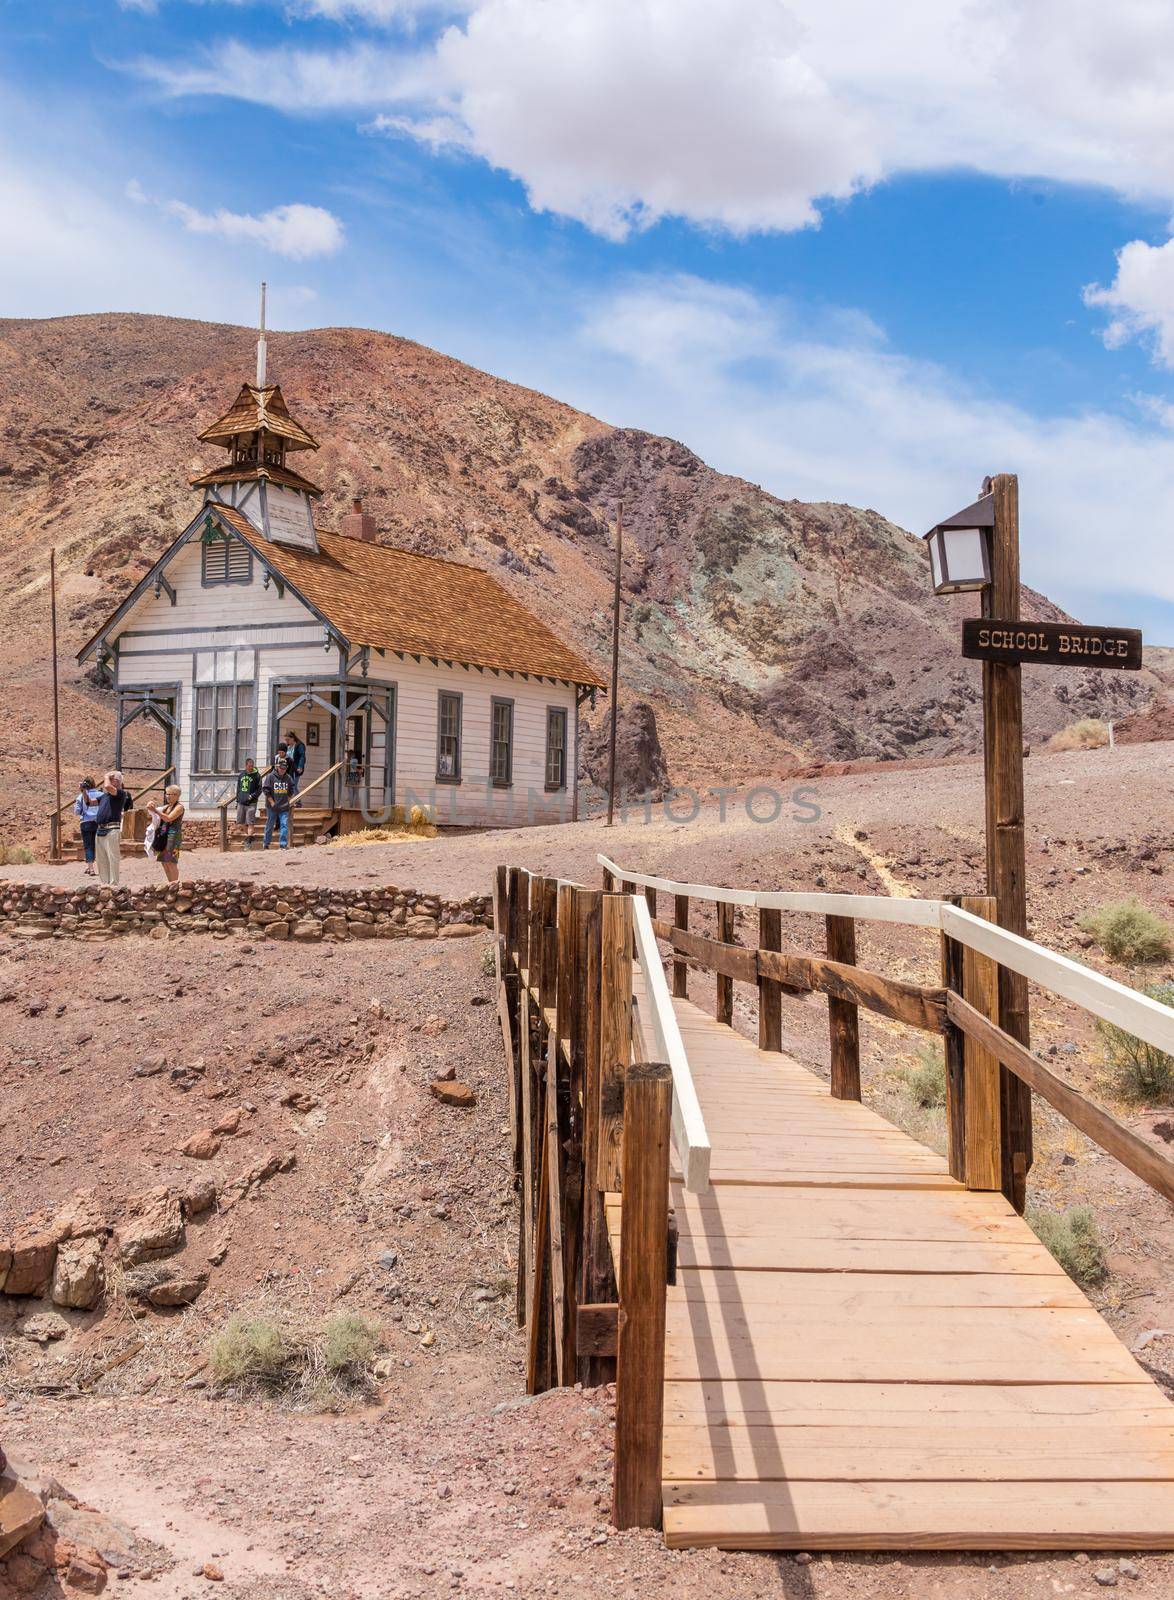 MAY 23. 2015- Calico, CA, USA: Calico is a ghost town in San Bernardino County, California, United States. Was founded in 1881 as a silver mining town. Now it is a county park.